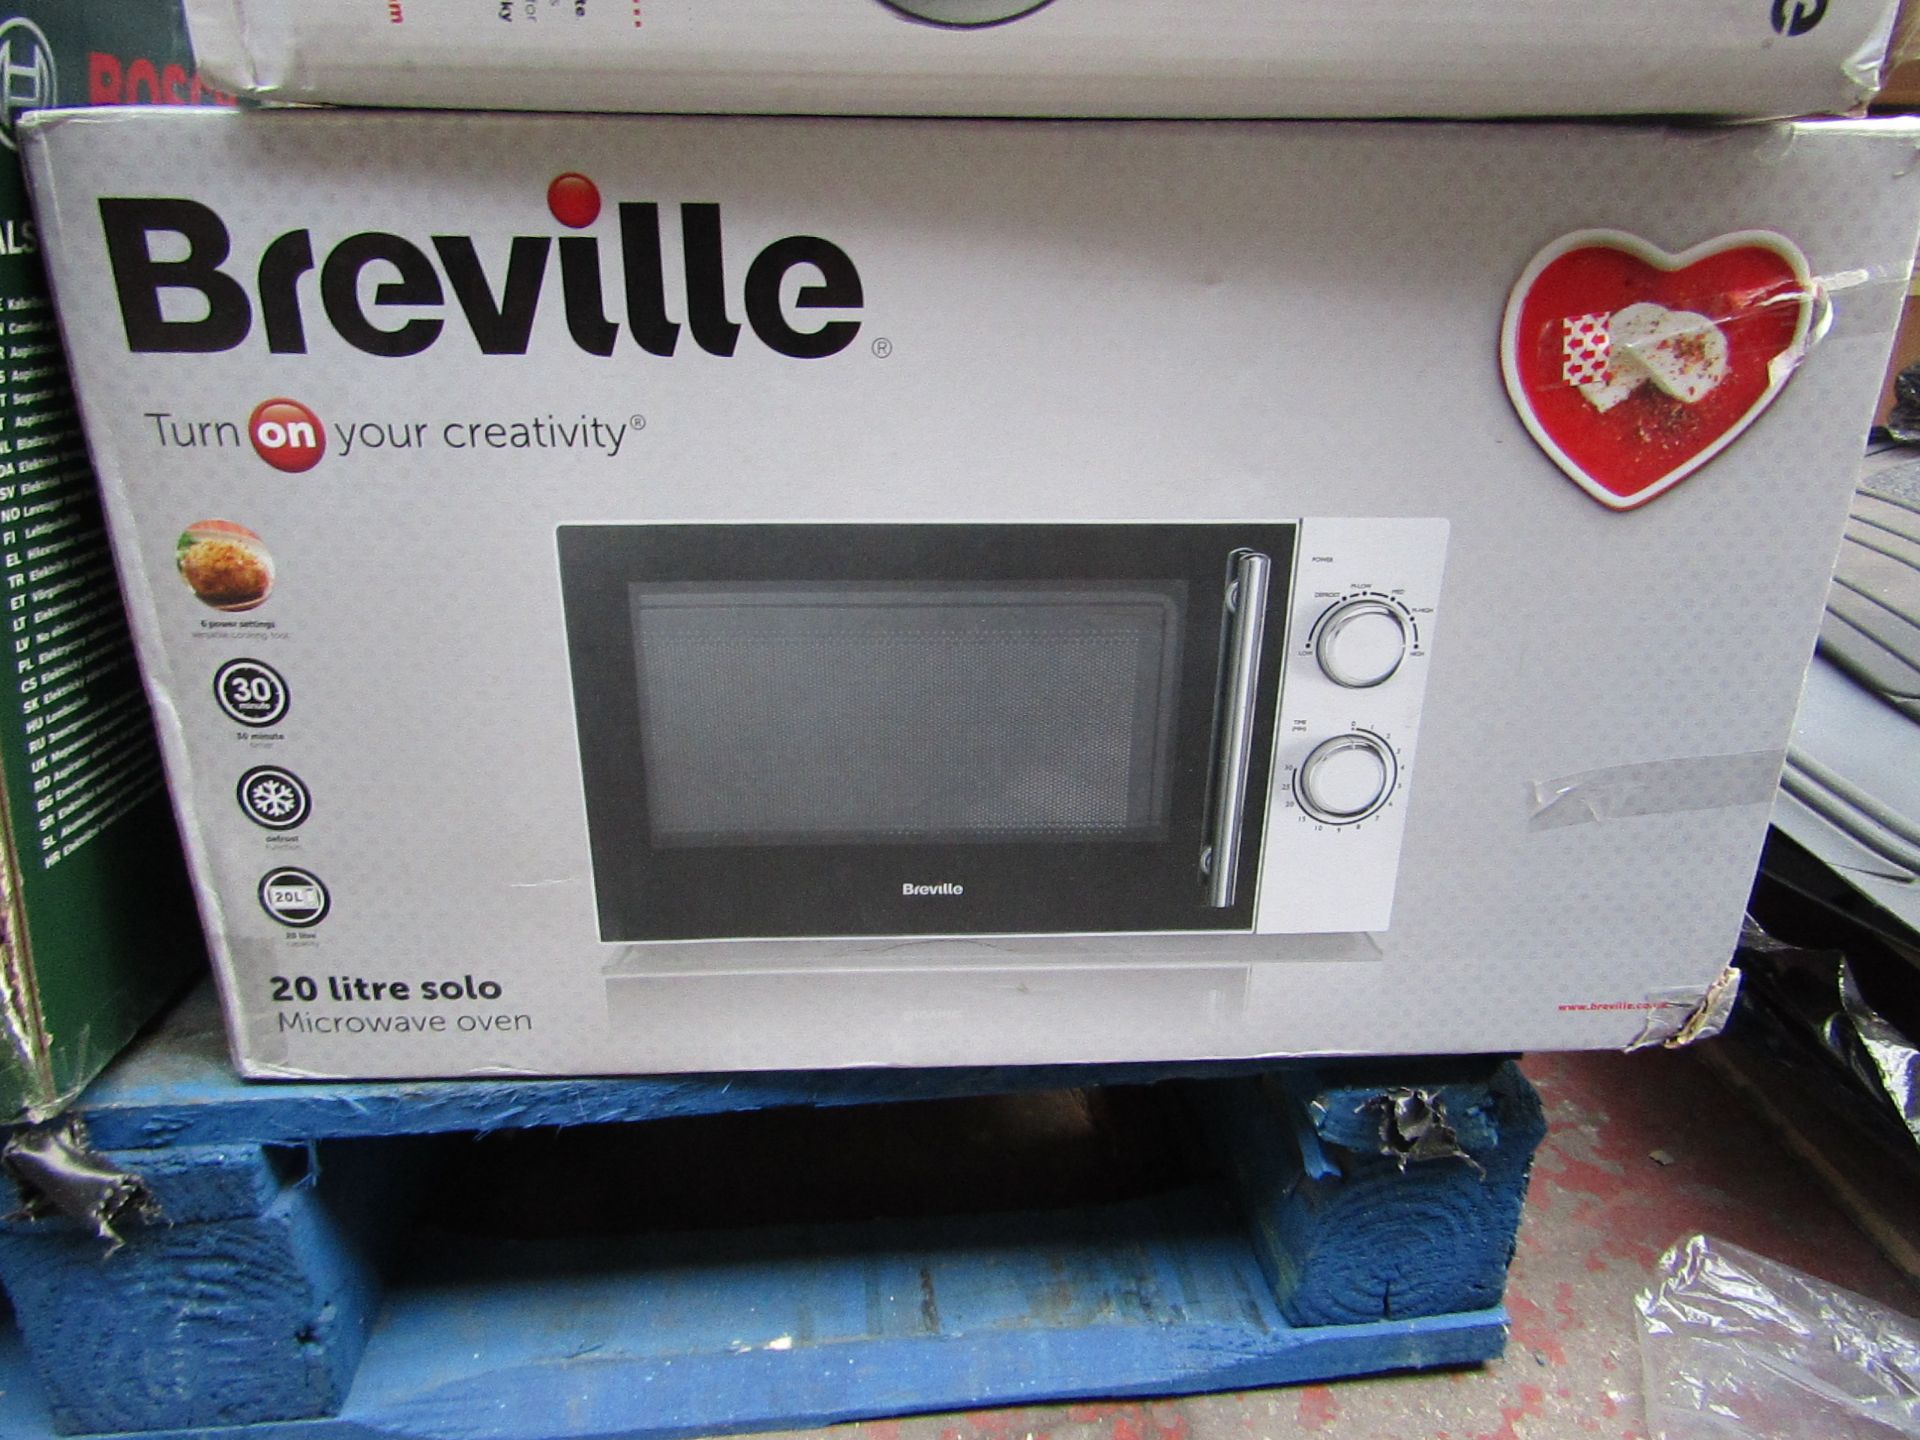 Breville microwave over boxed